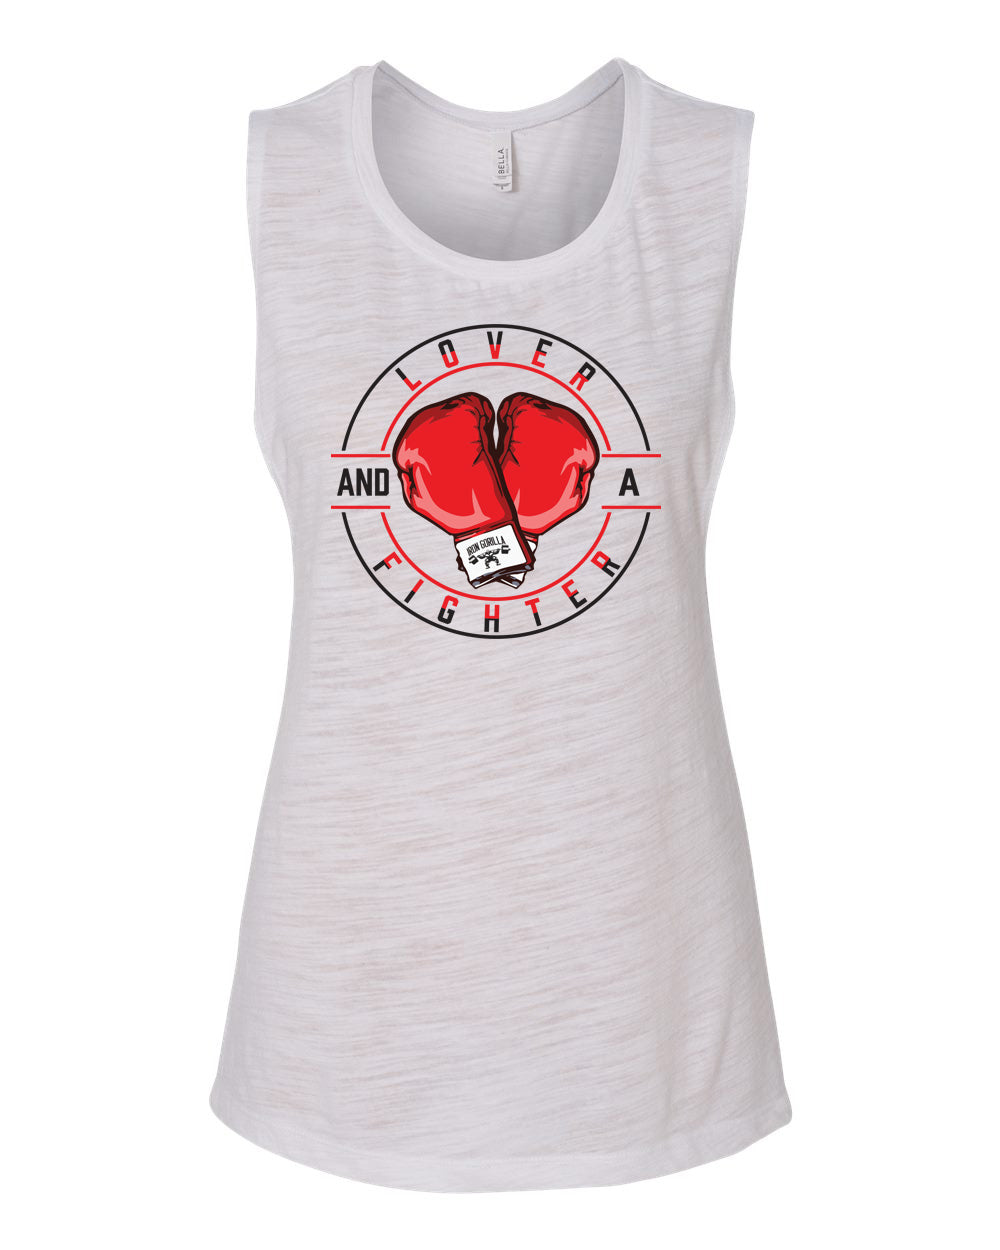 Ladies "Iron Gorilla - Lover and a Fighter" Flowy Scoop Muscle Tank - White Slub